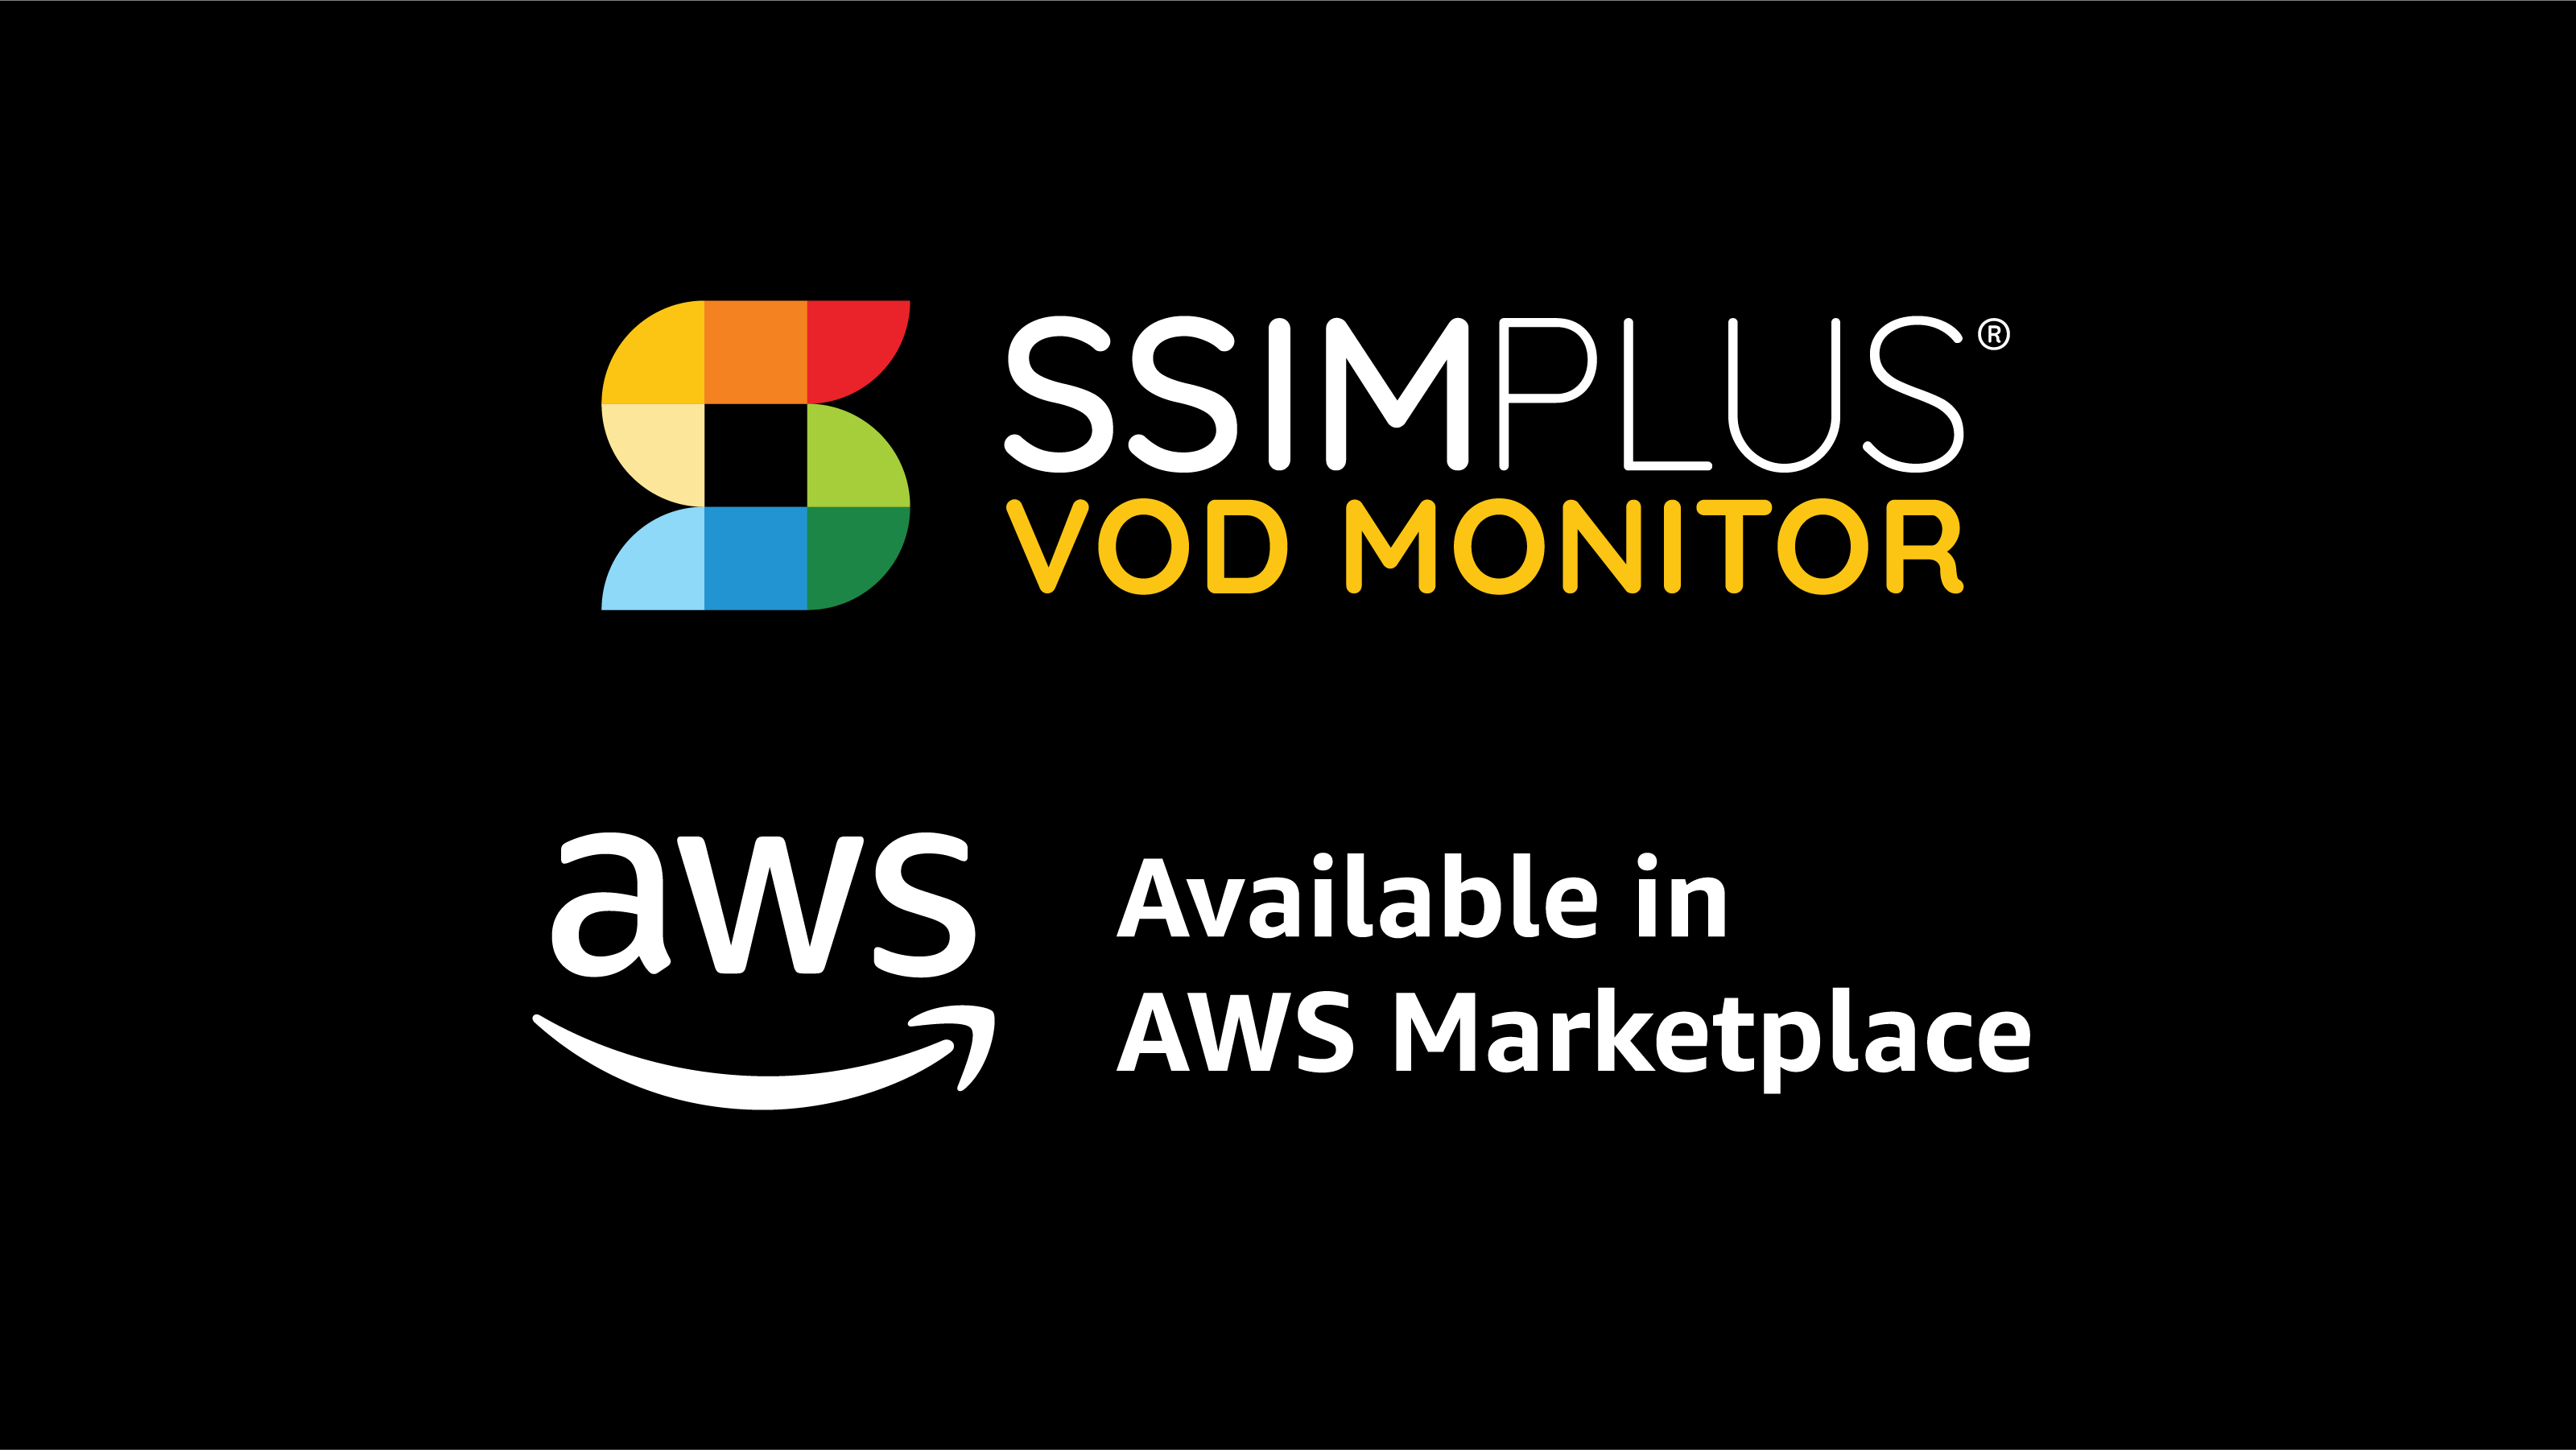 SSIMWAVE Brings SSIMPLUS VOD Monitor to AWS Marketplace